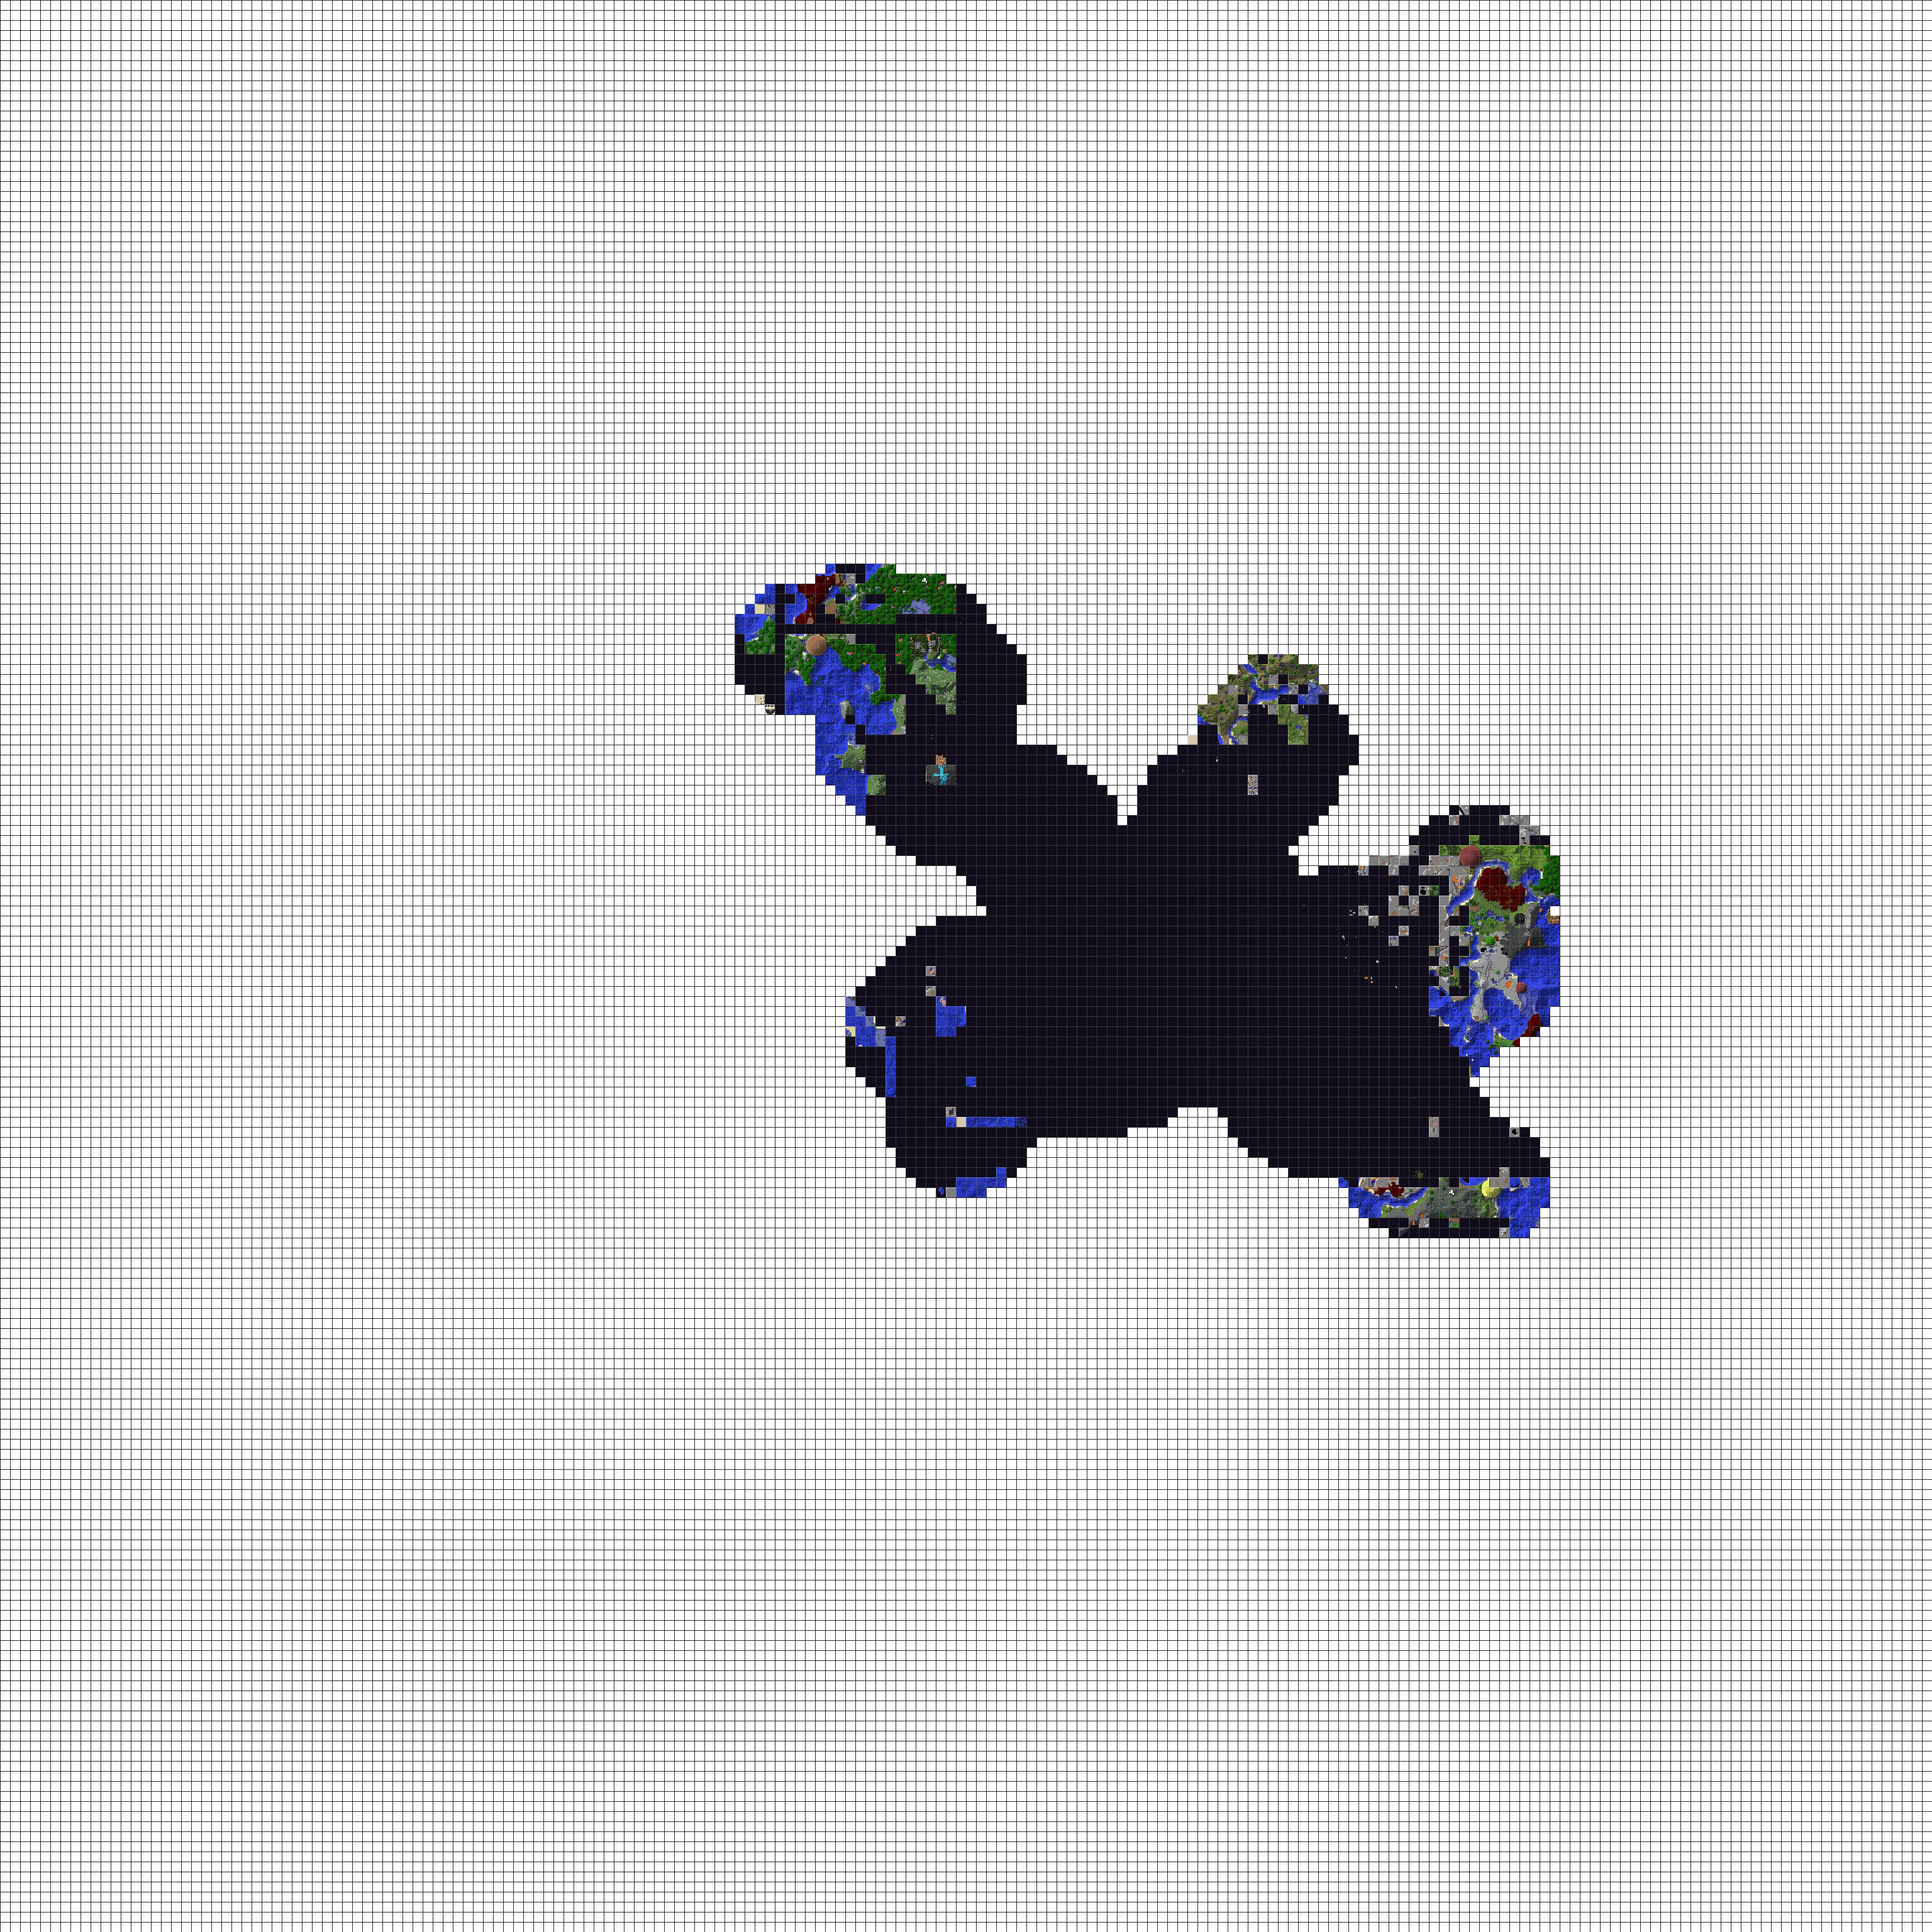 2015-09-03_12.17.10_Copy of new world 5 or so_Overworld_day.png